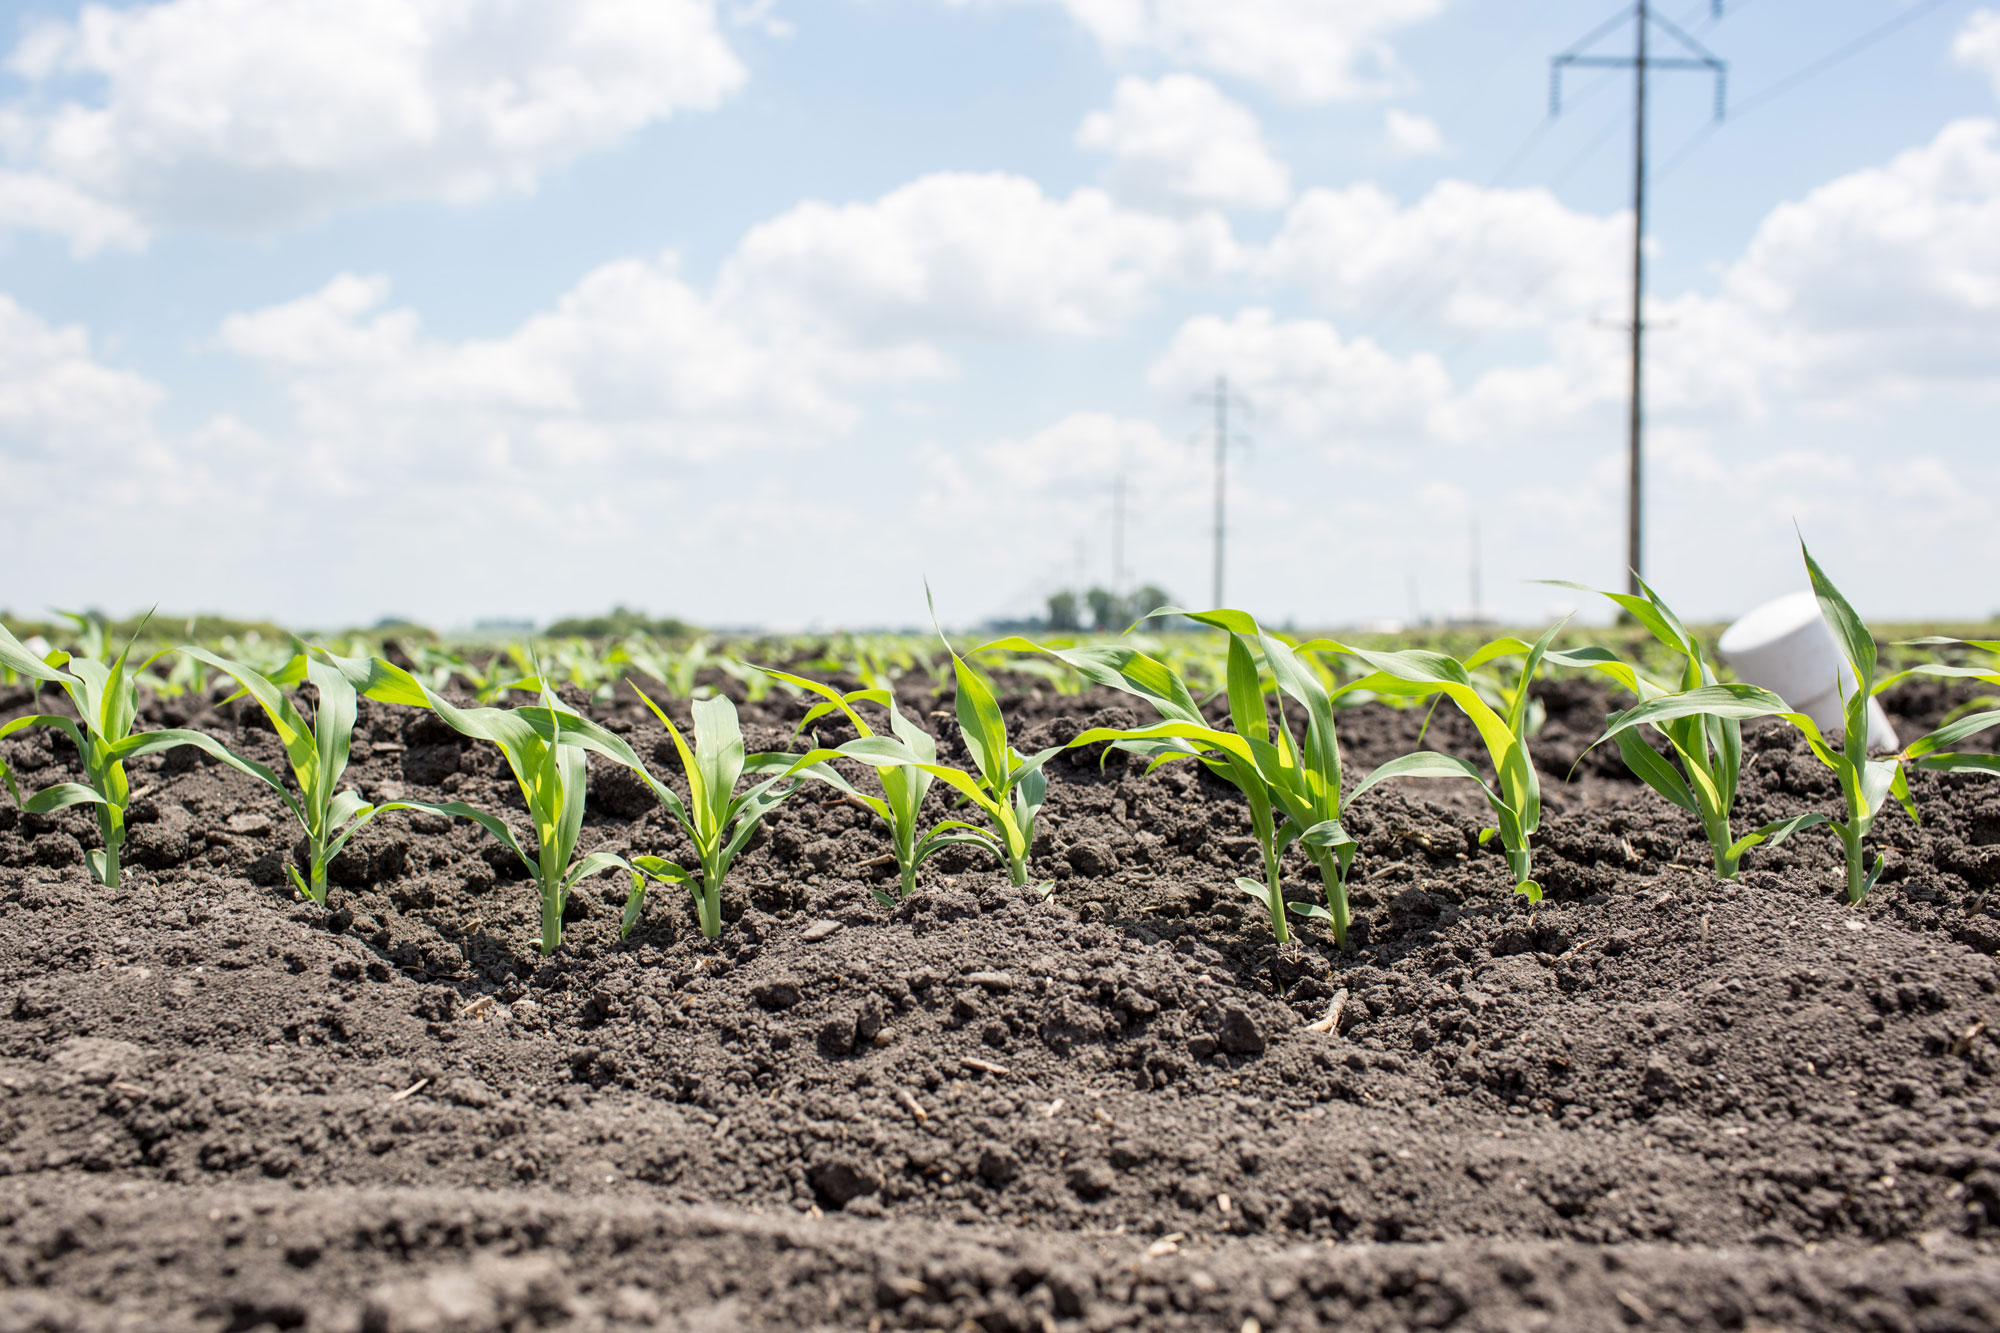 Photograph of a field with young sorghum plants just past the seedling stage growing in it.